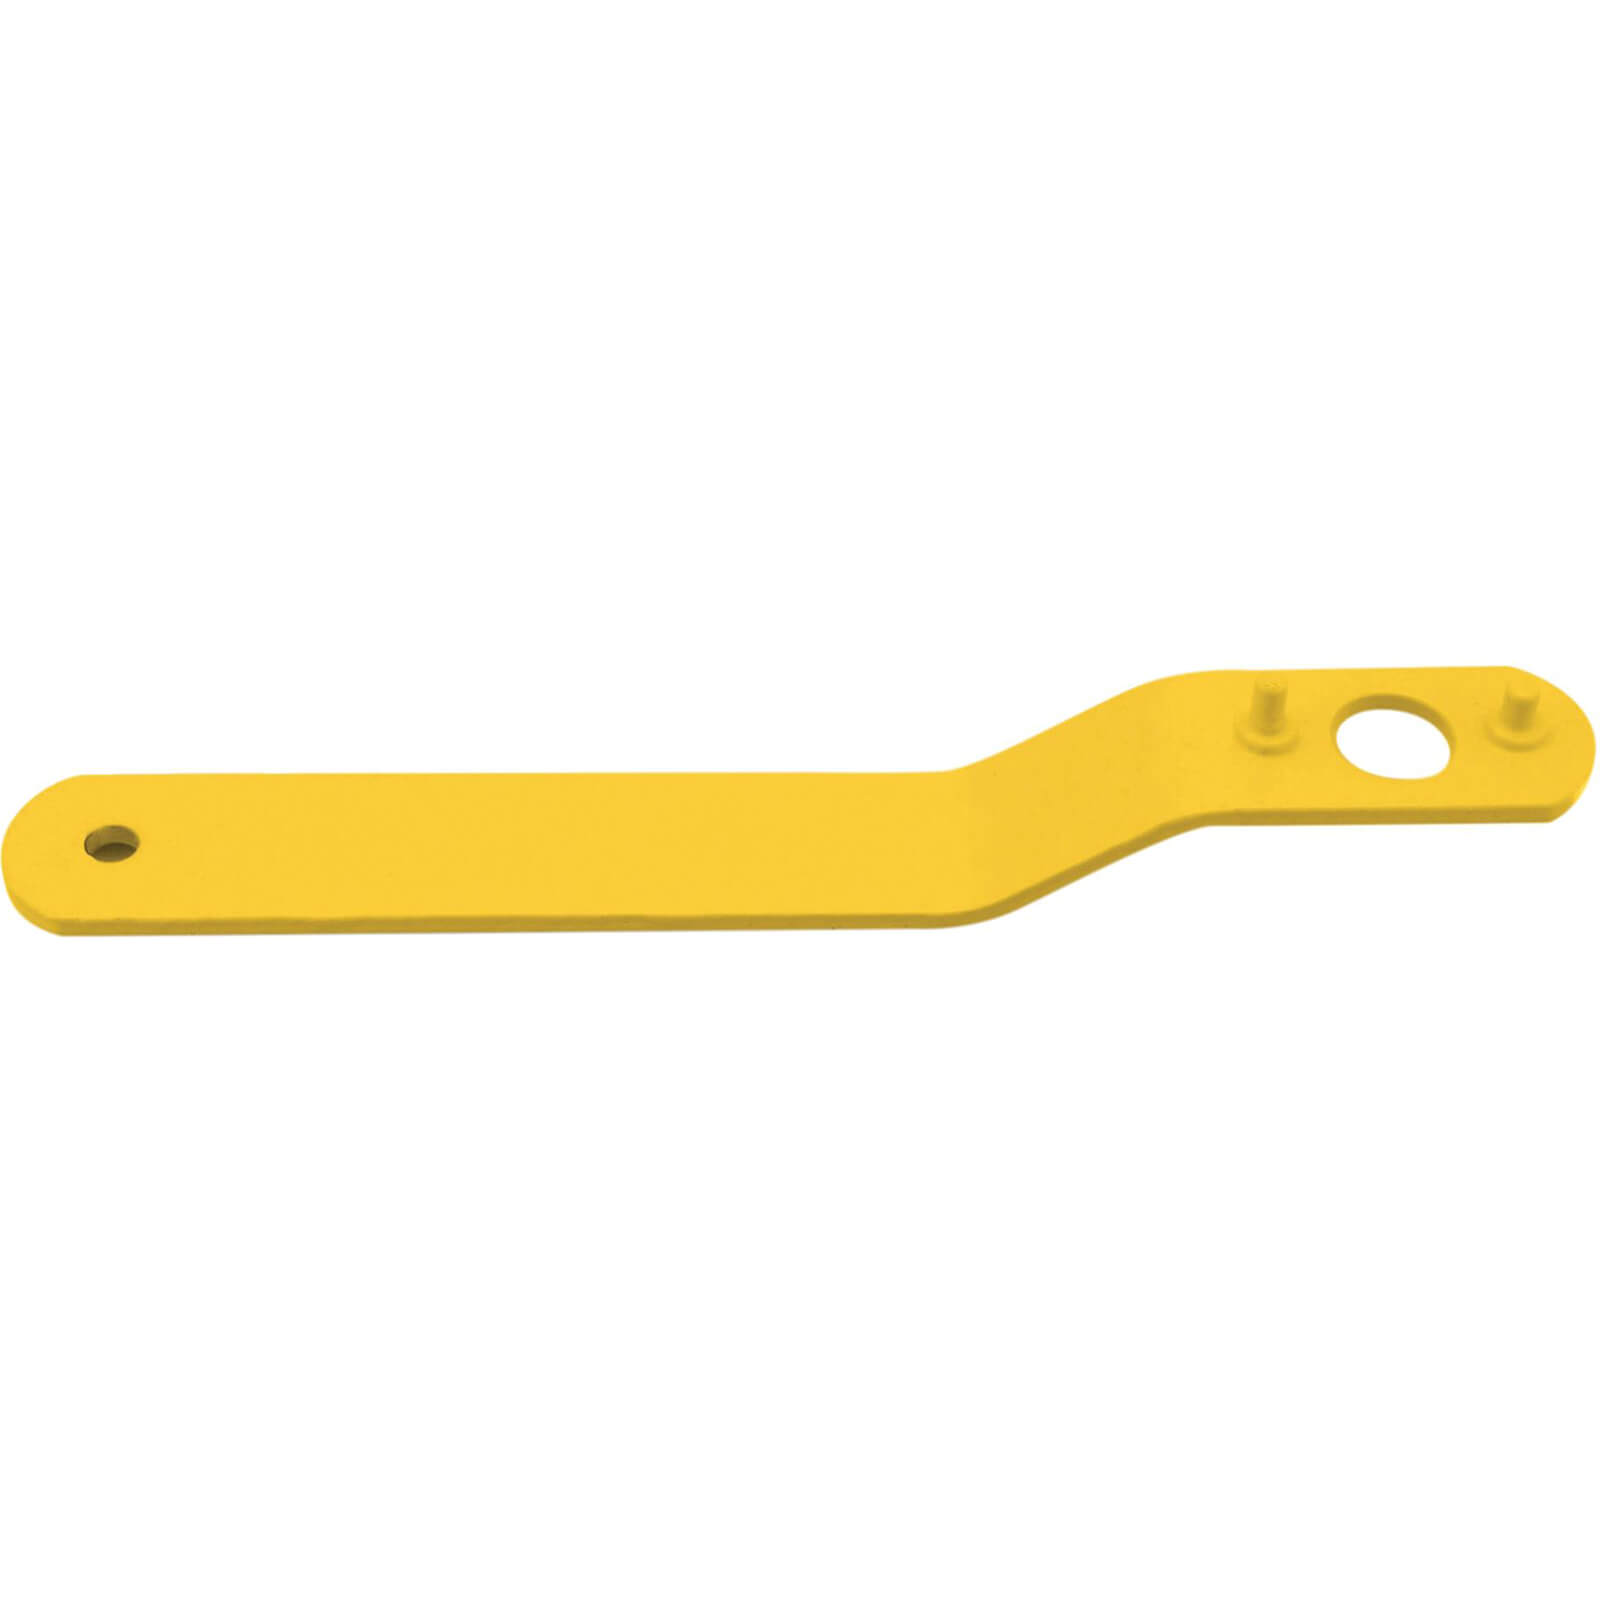 Photo of Flexipads 28-4 Yellow Angle Grinder Pin Spanner